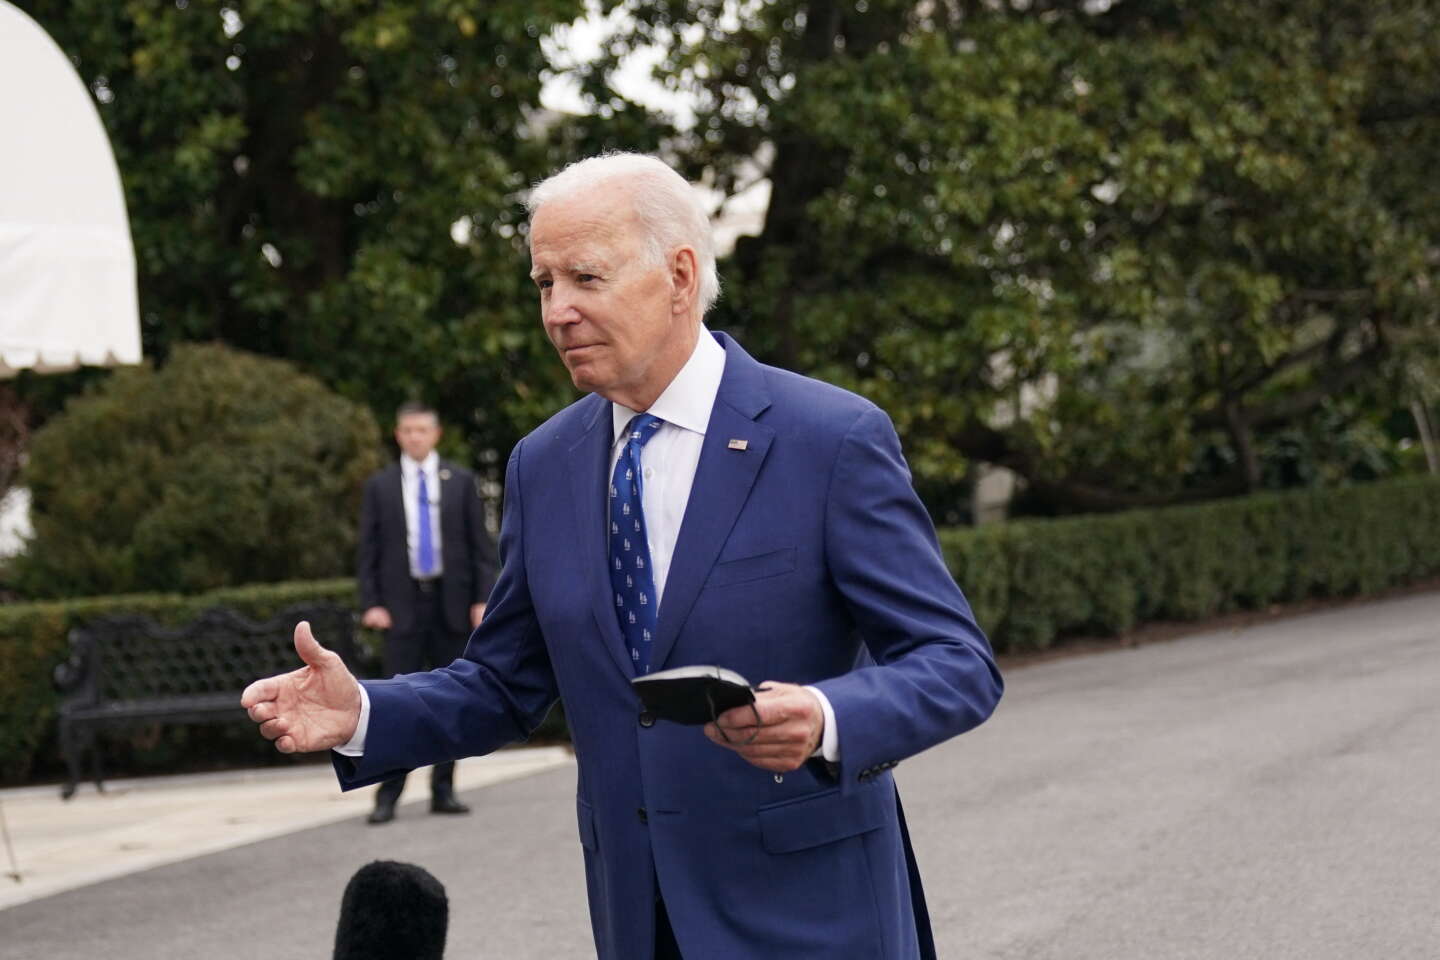 Confidential documents from the Obama era were discovered at an institute founded by Joe Biden